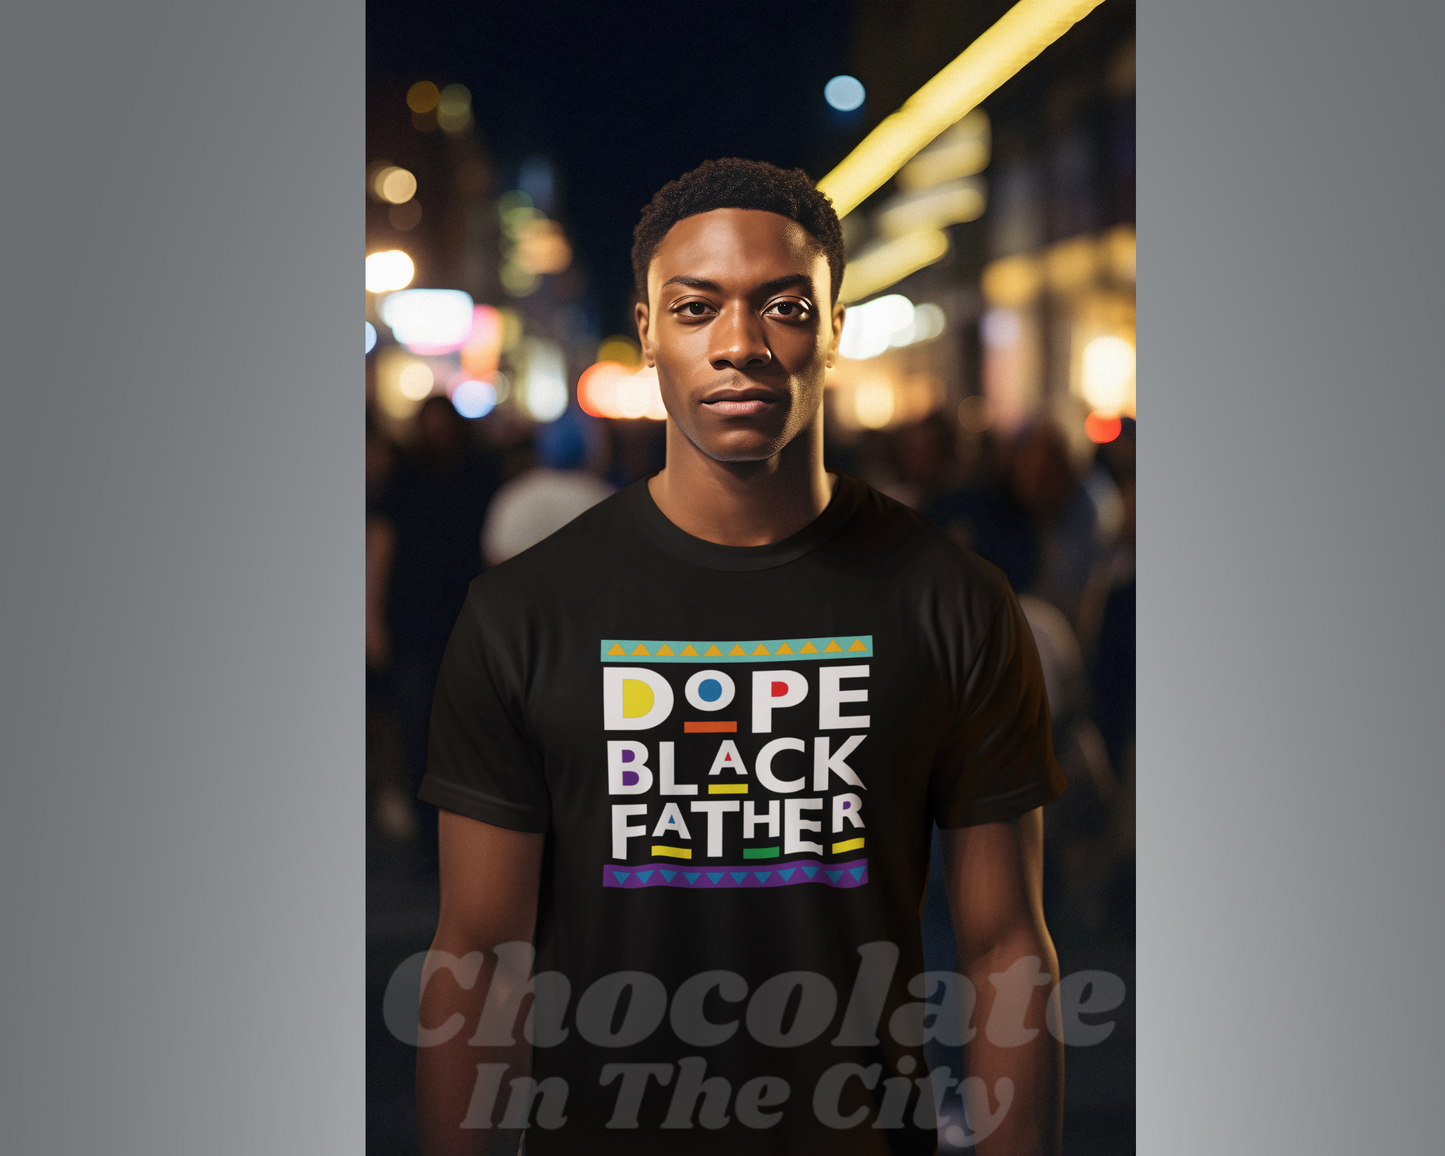 Dope Black Father - T-Shirt